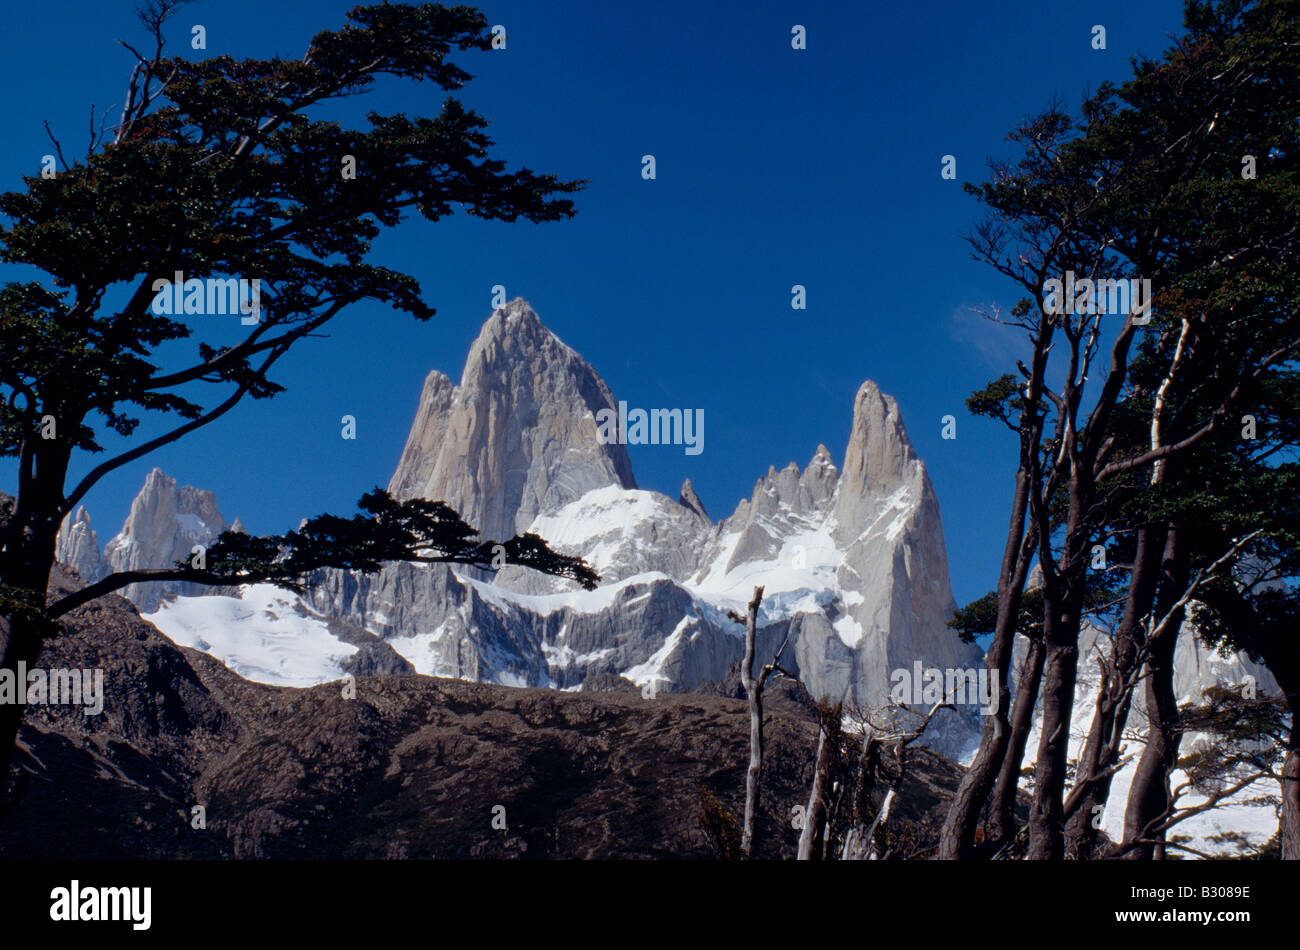 Argentina, Santa Cruz Province, Parque Nacional Los Glaciares, Cerro Fitzroy. Cerro Fitzroy, in the Los Glaciares National Park, framed by trees. This granite peak rises to 11,073 feet (3,375 m) above sea level and was first climbed in 1952 by Terray and Magnone. Stock Photo